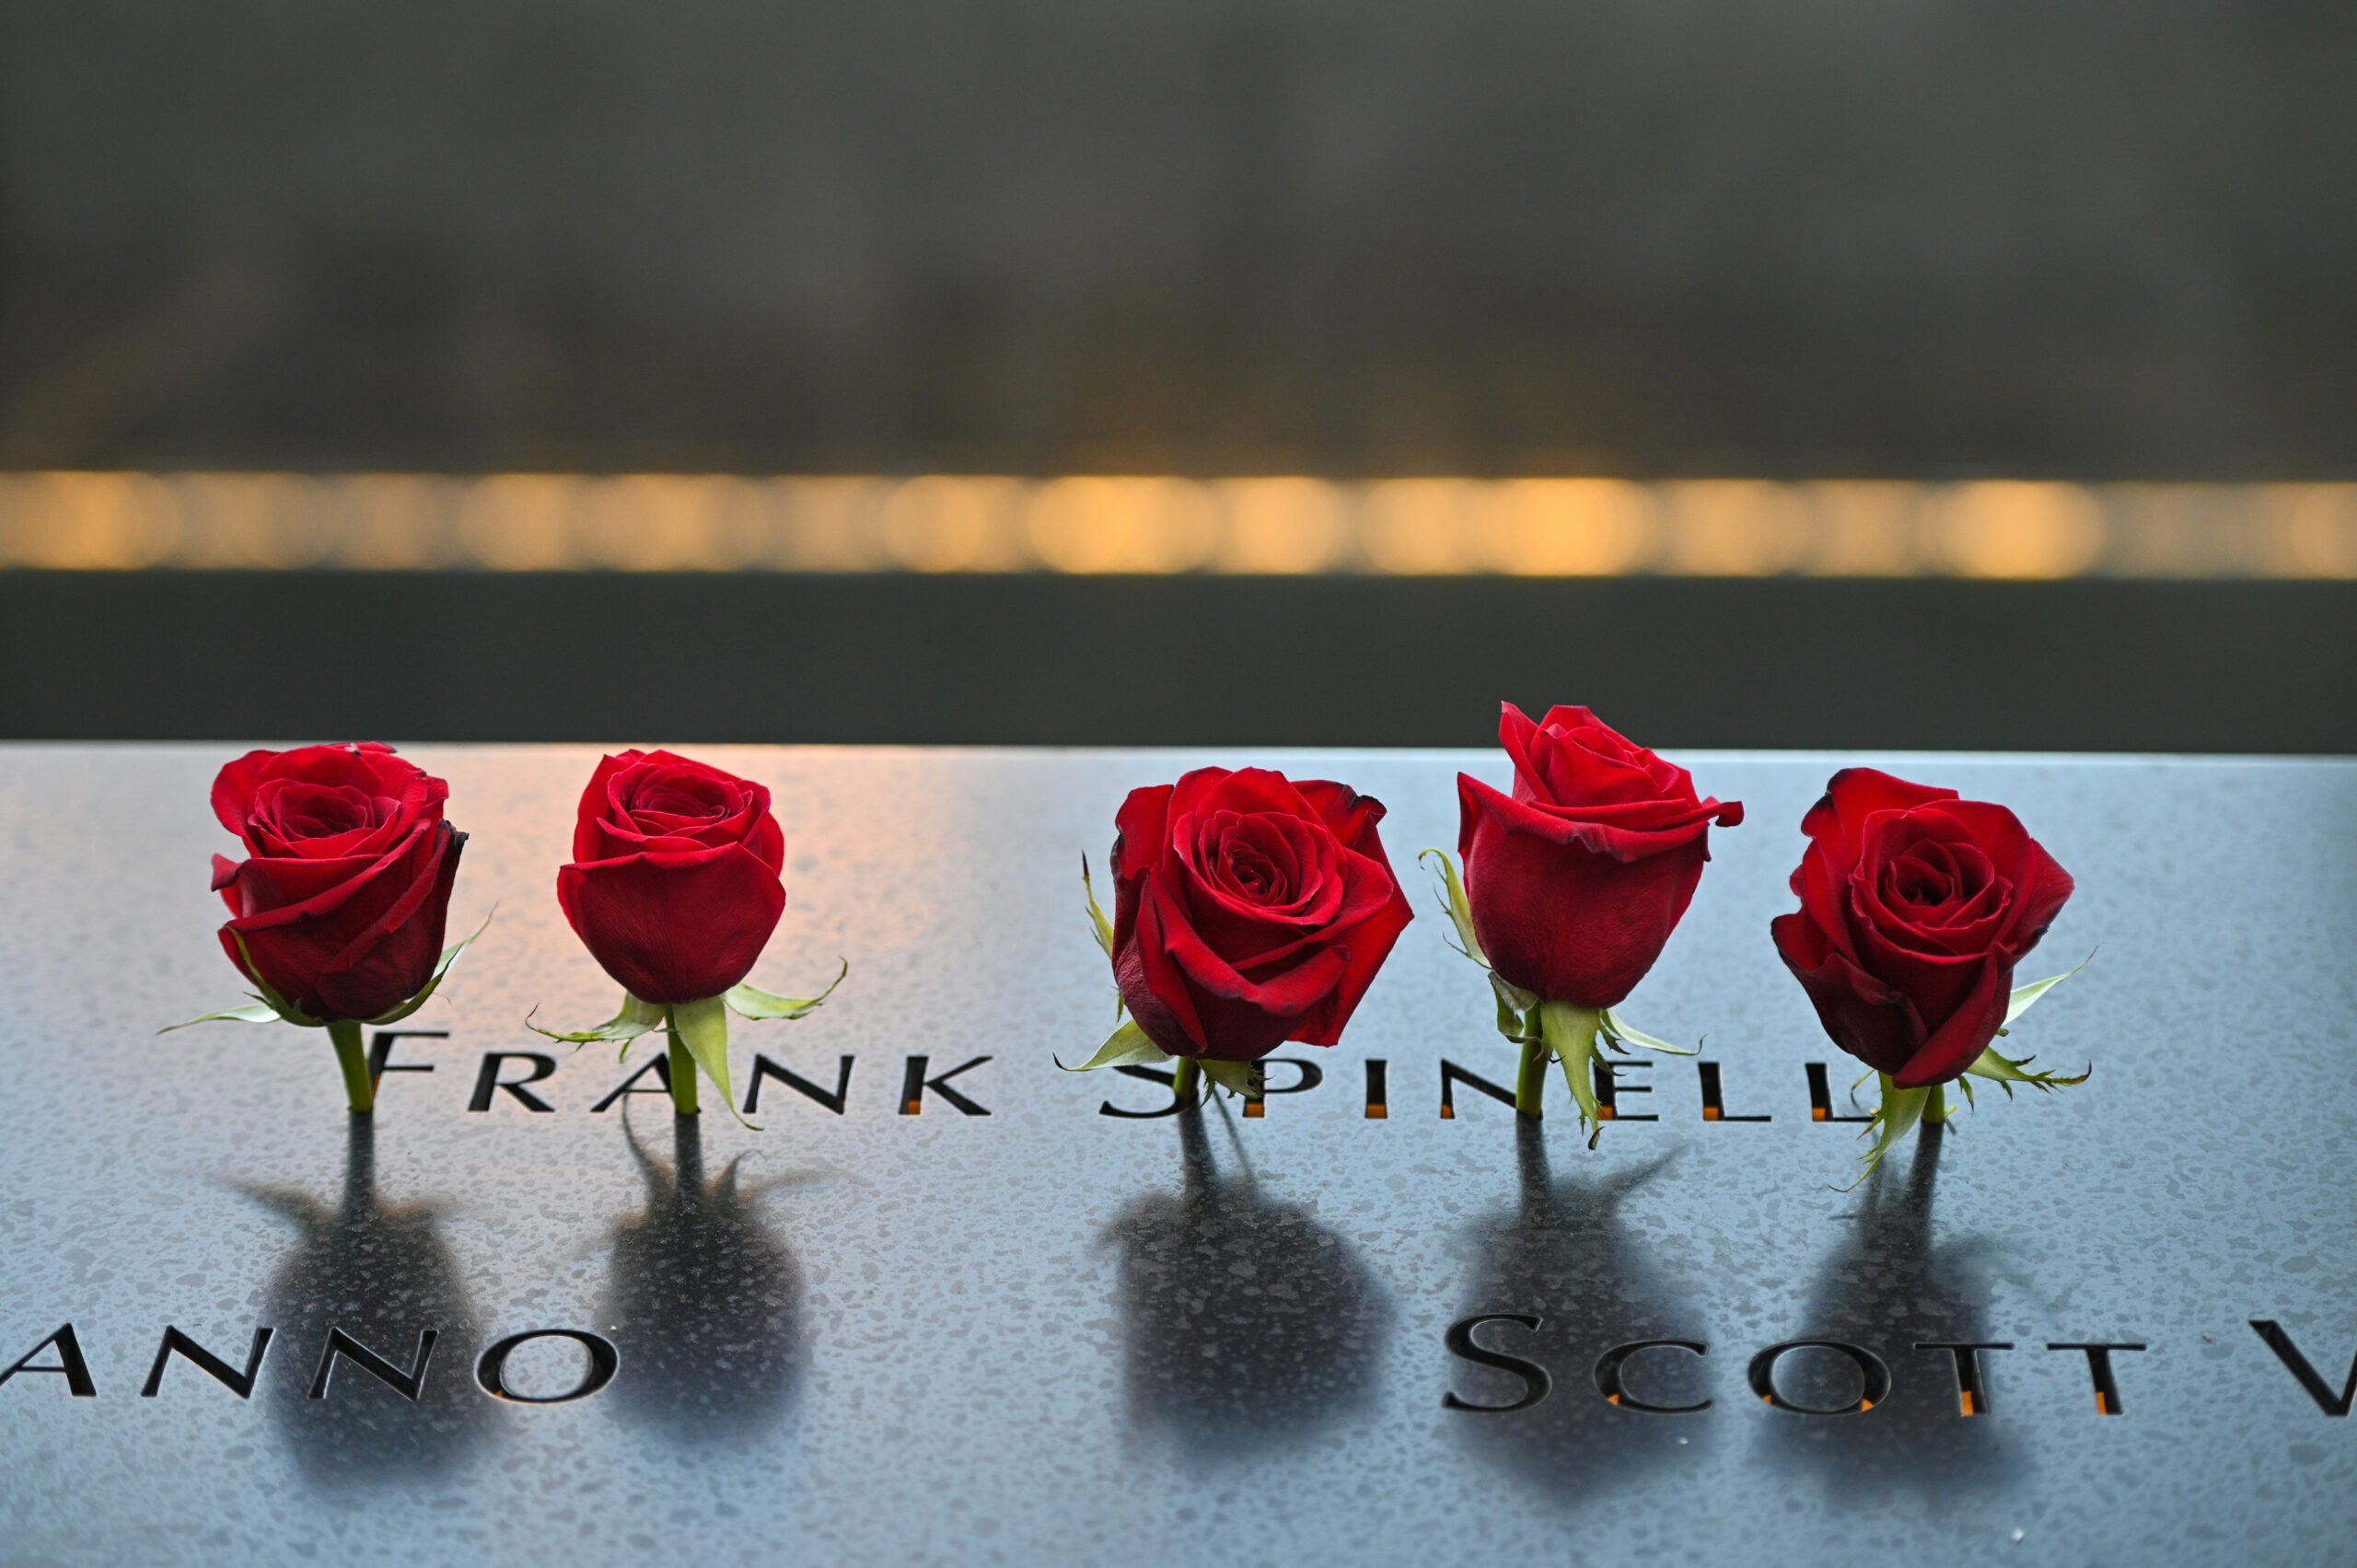 NEW YORK, NEW YORK - SEPTEMBER 11: Roses are placed at the name of Frank Spinelli during a ceremony at the National September 11 Memorial &amp; Museum commemorating the 20th anniversary of the September 11th terrorist attacks on the World Trade Center on September 11, 2021 in New York City. The nation is marking the 20th anniversary of the terror attacks of September 11, 2001, when the terrorist group al-Qaeda flew hijacked airplanes into the World Trade Center, Shanksville, PA and the Pentagon, killing nearly 3,000 people. (Photo by Anthony Behar - Pool/Getty Images)